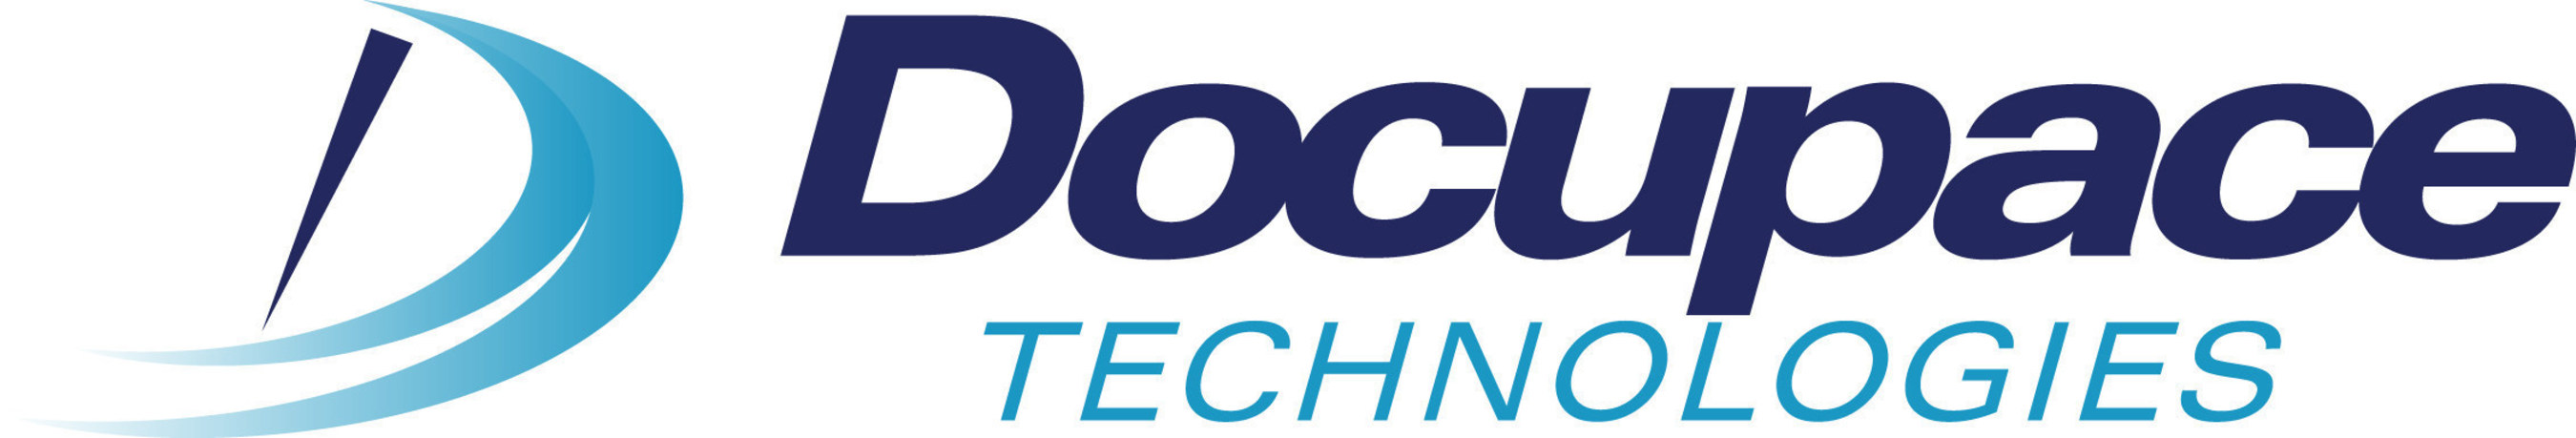 Docupace Technologies, LLC pioneered and implemented SEC/FINRA-compliant Straight-through Processing technology for financial services companies.